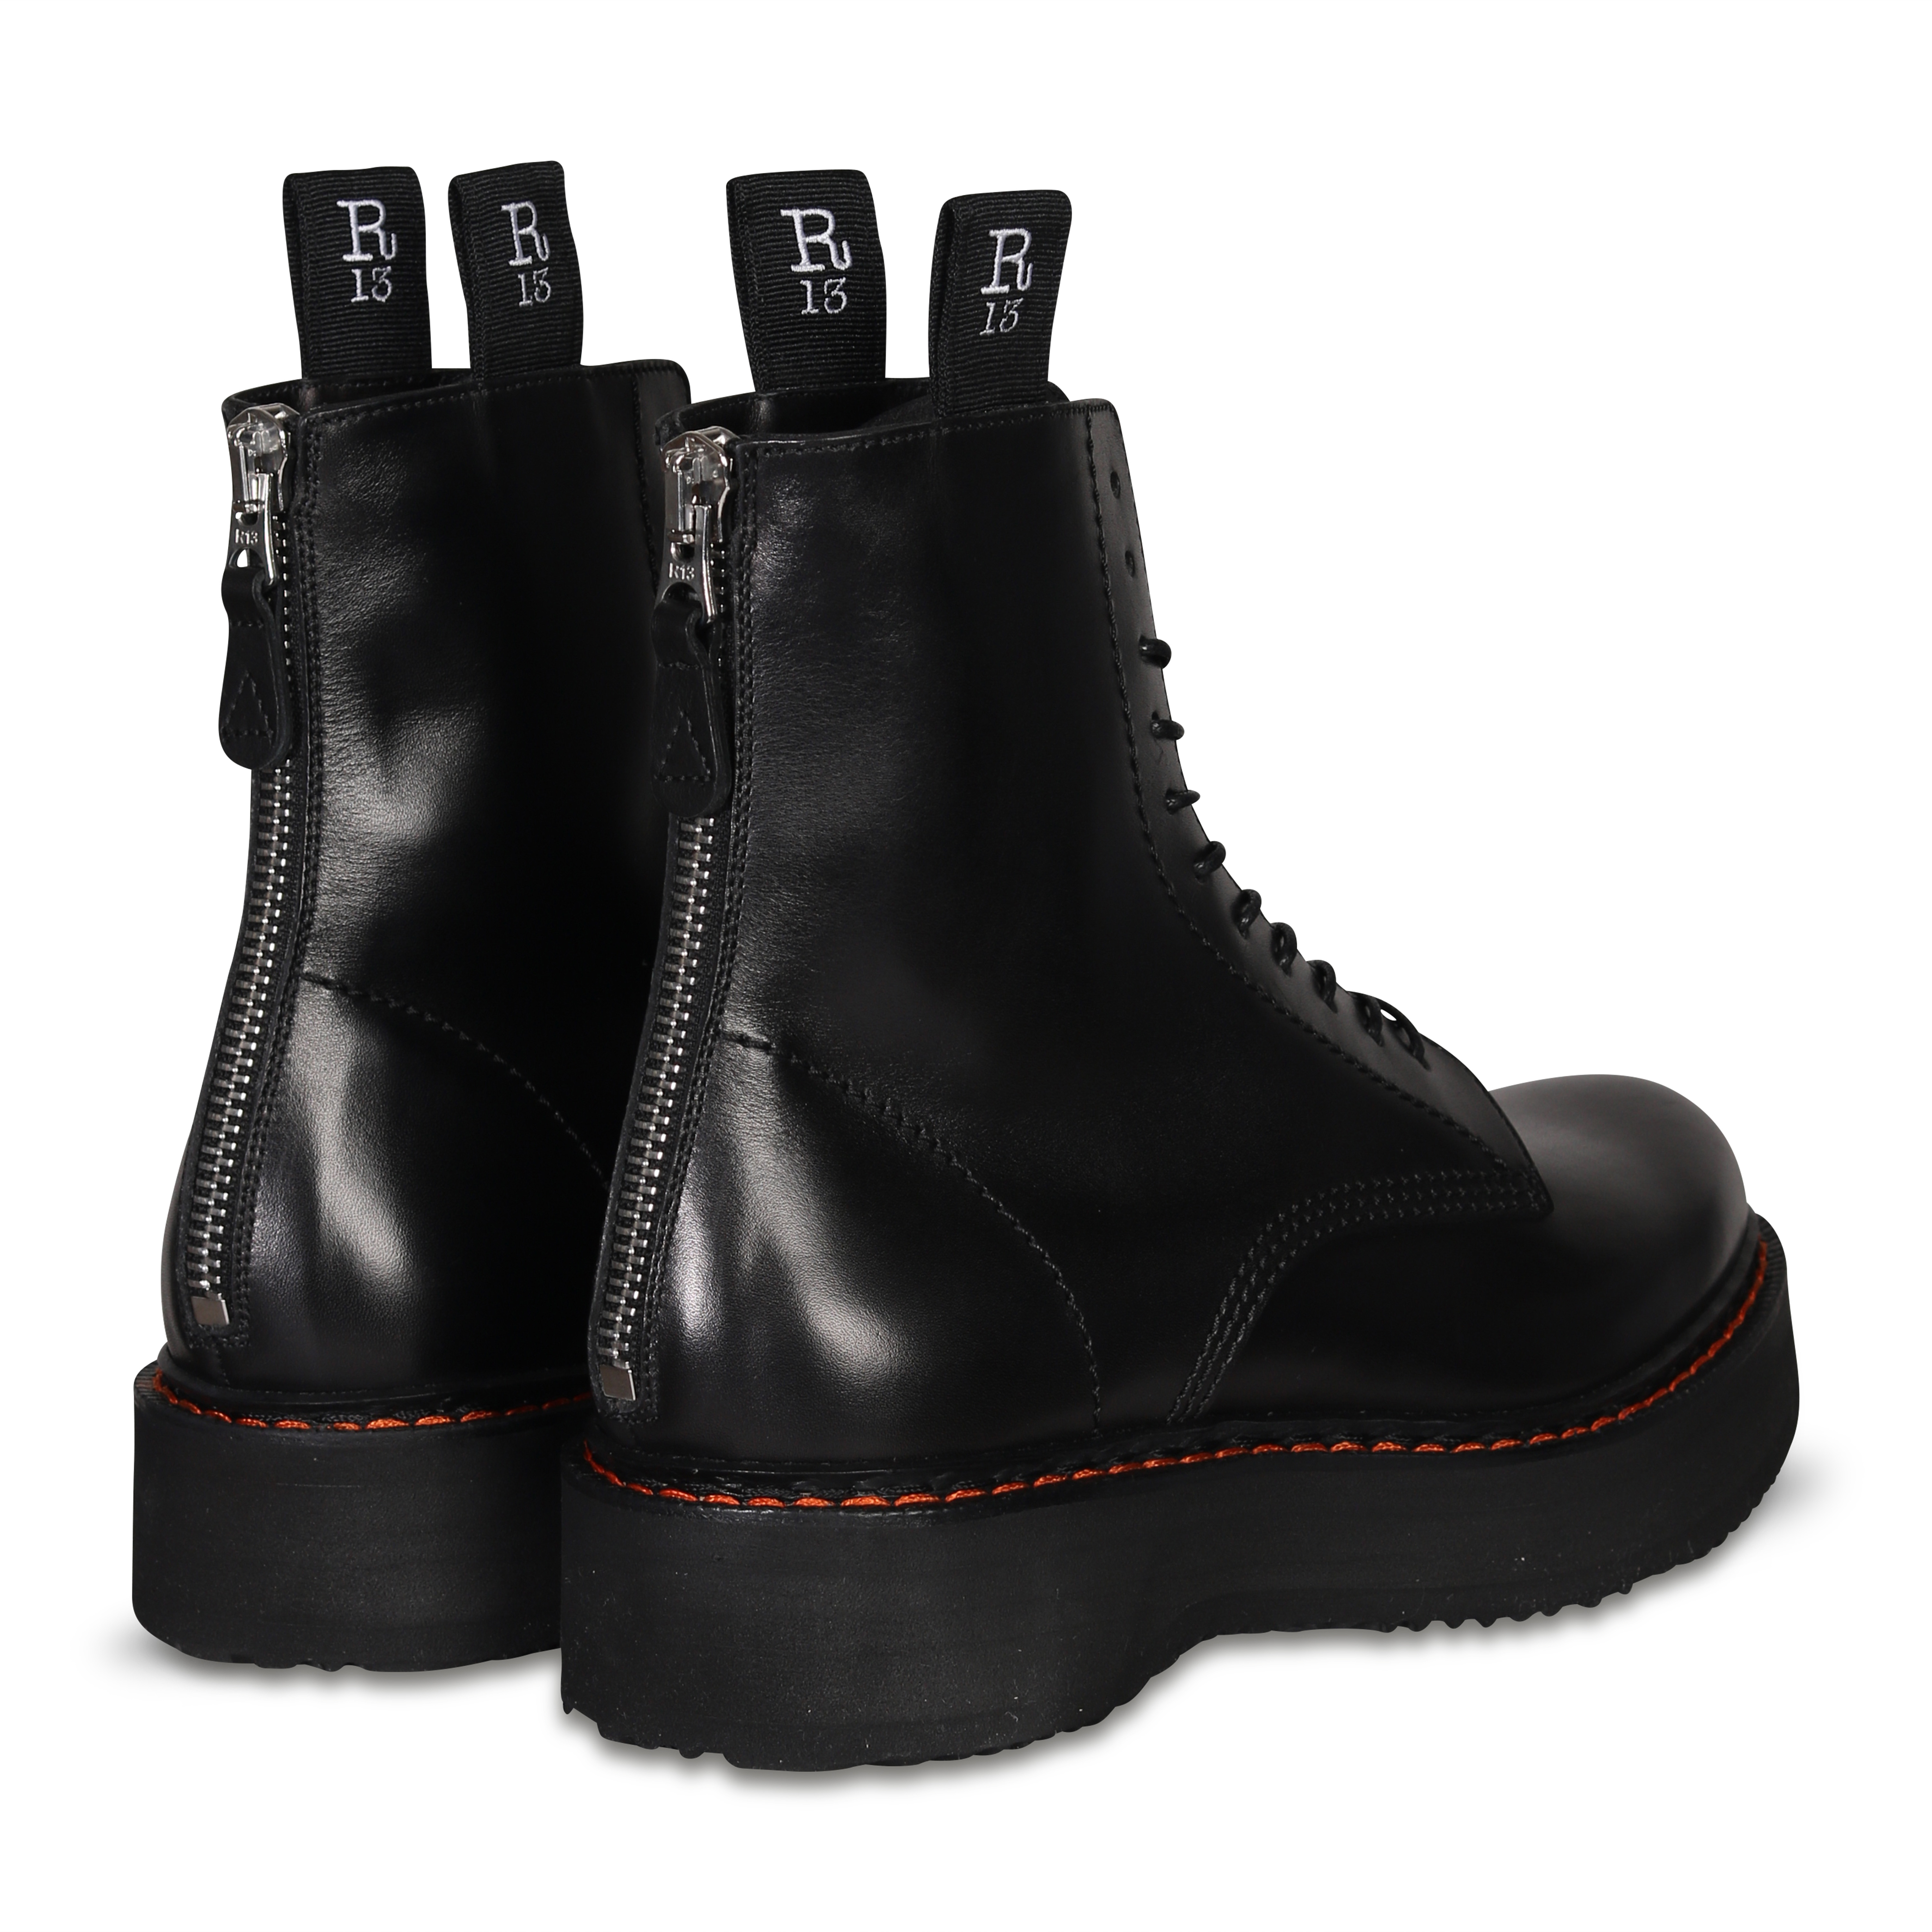 R13 Stack Boots in Black 41